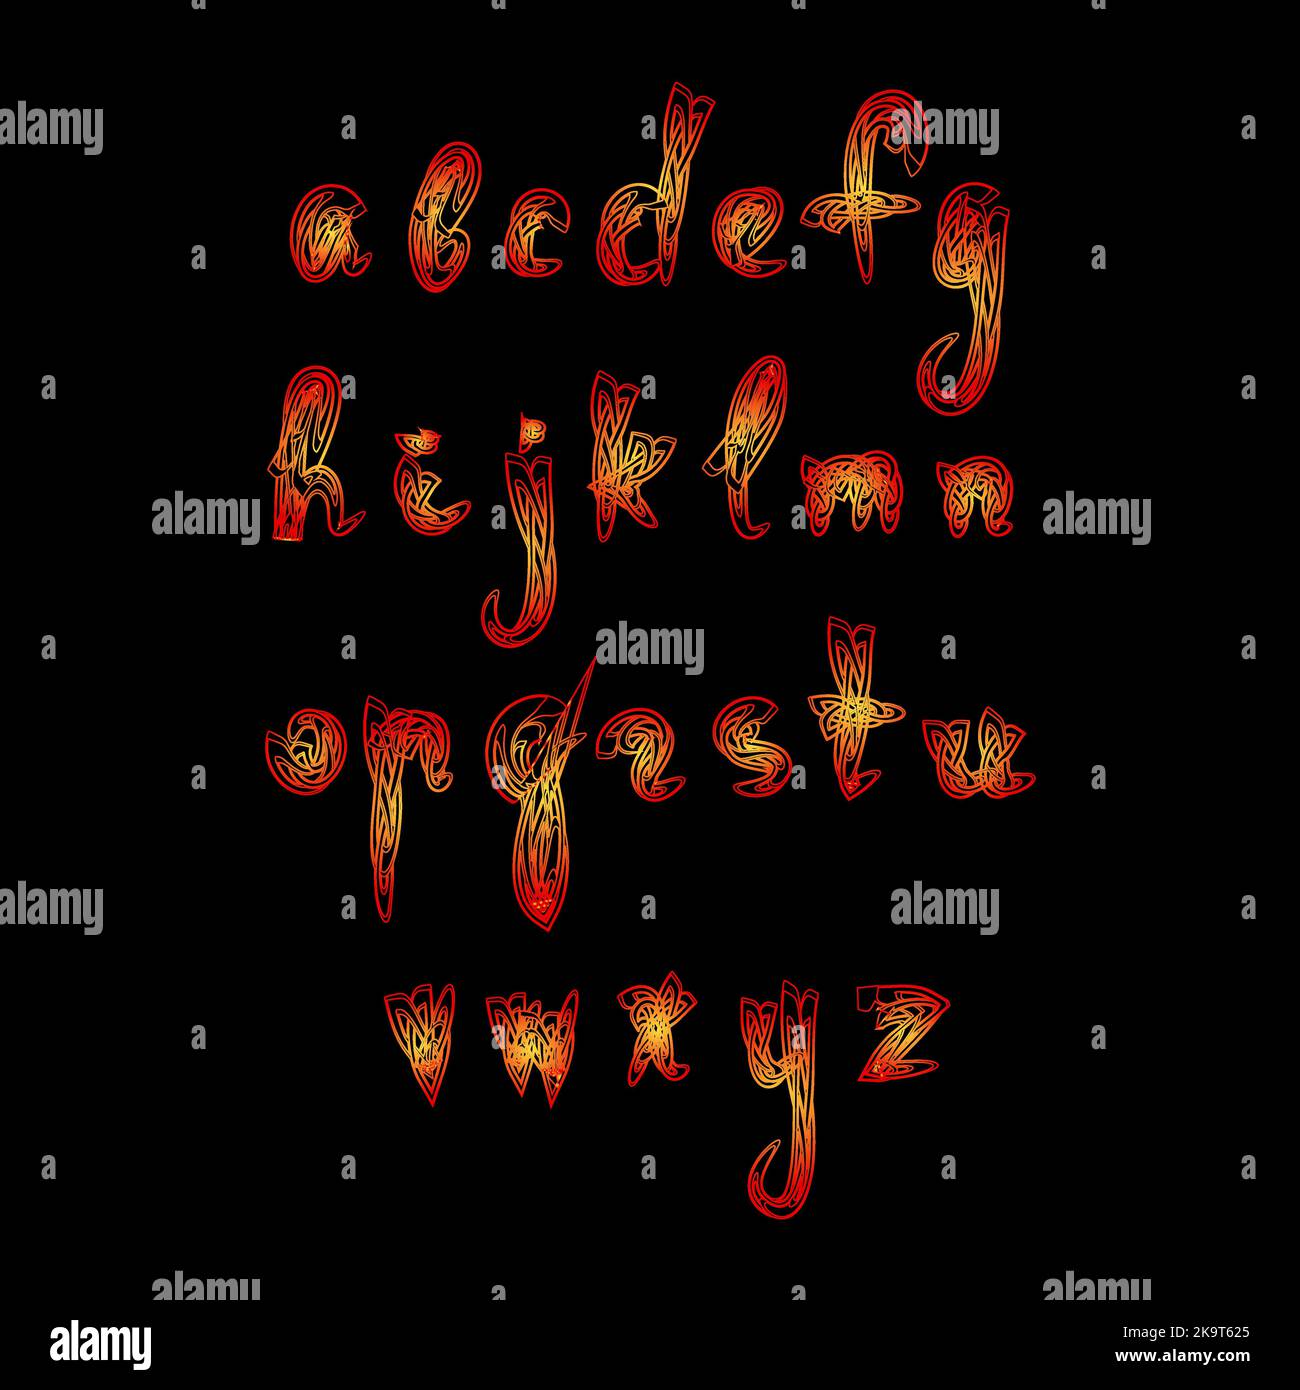 Halloween alphabet. Colorful letters on black background. Stock Vector